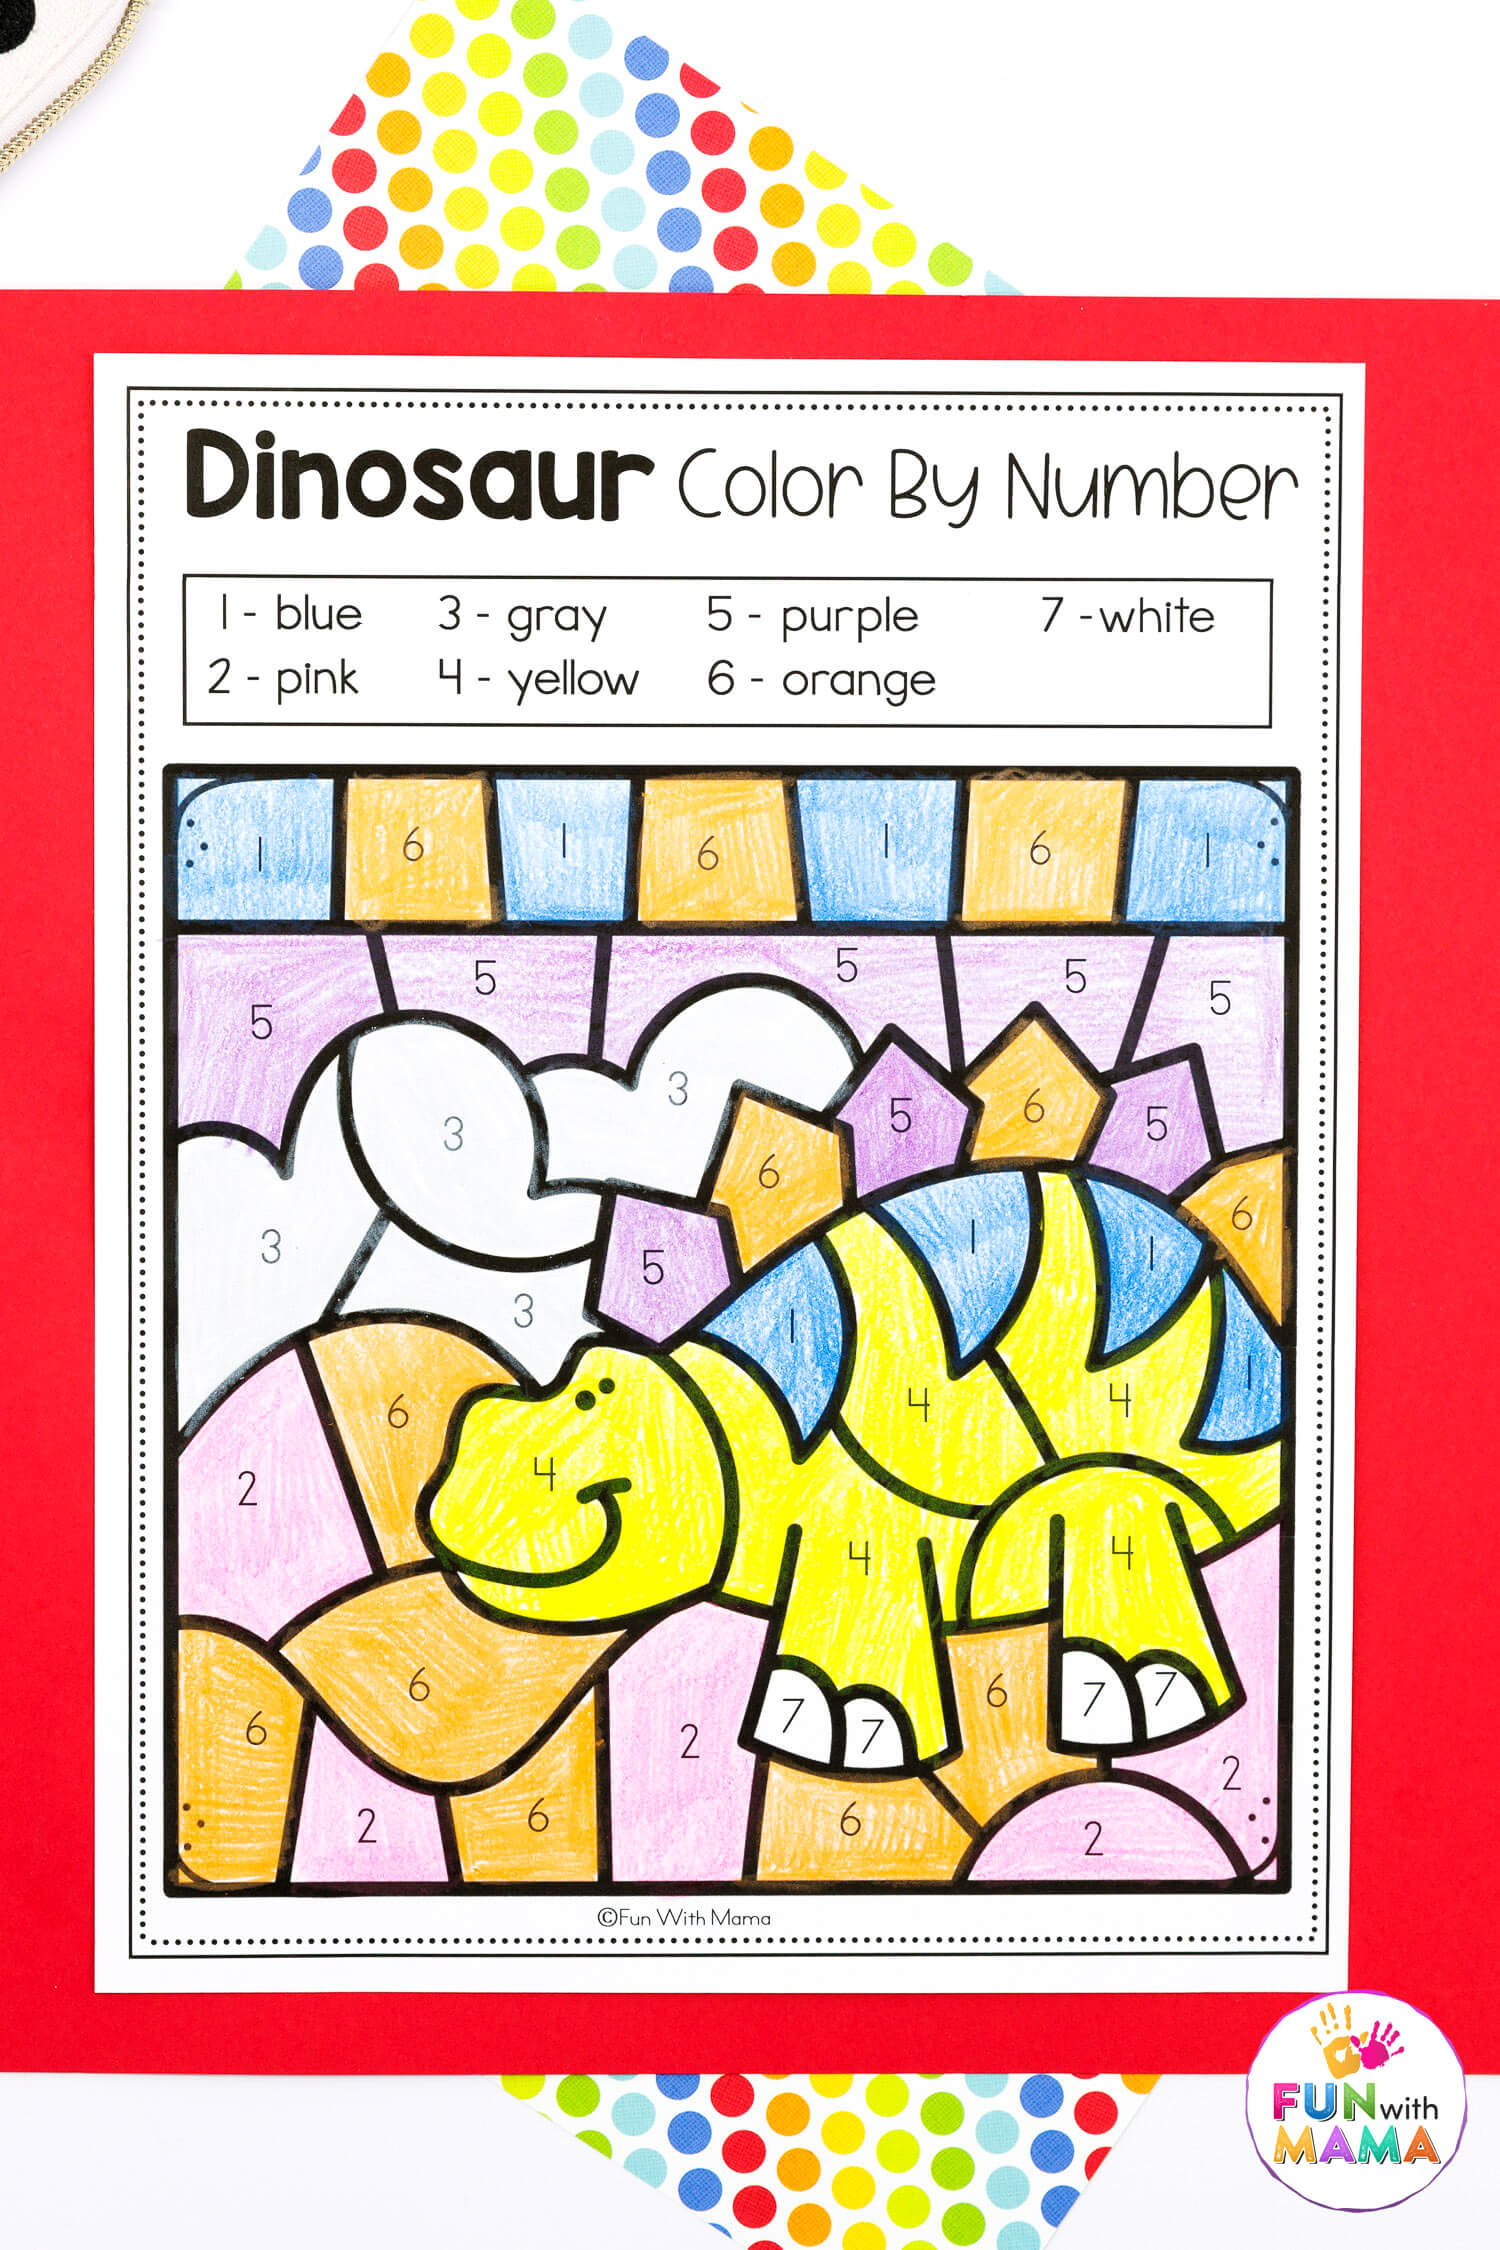 color by number dinosaurs worksheet filled in with 7 different pastels